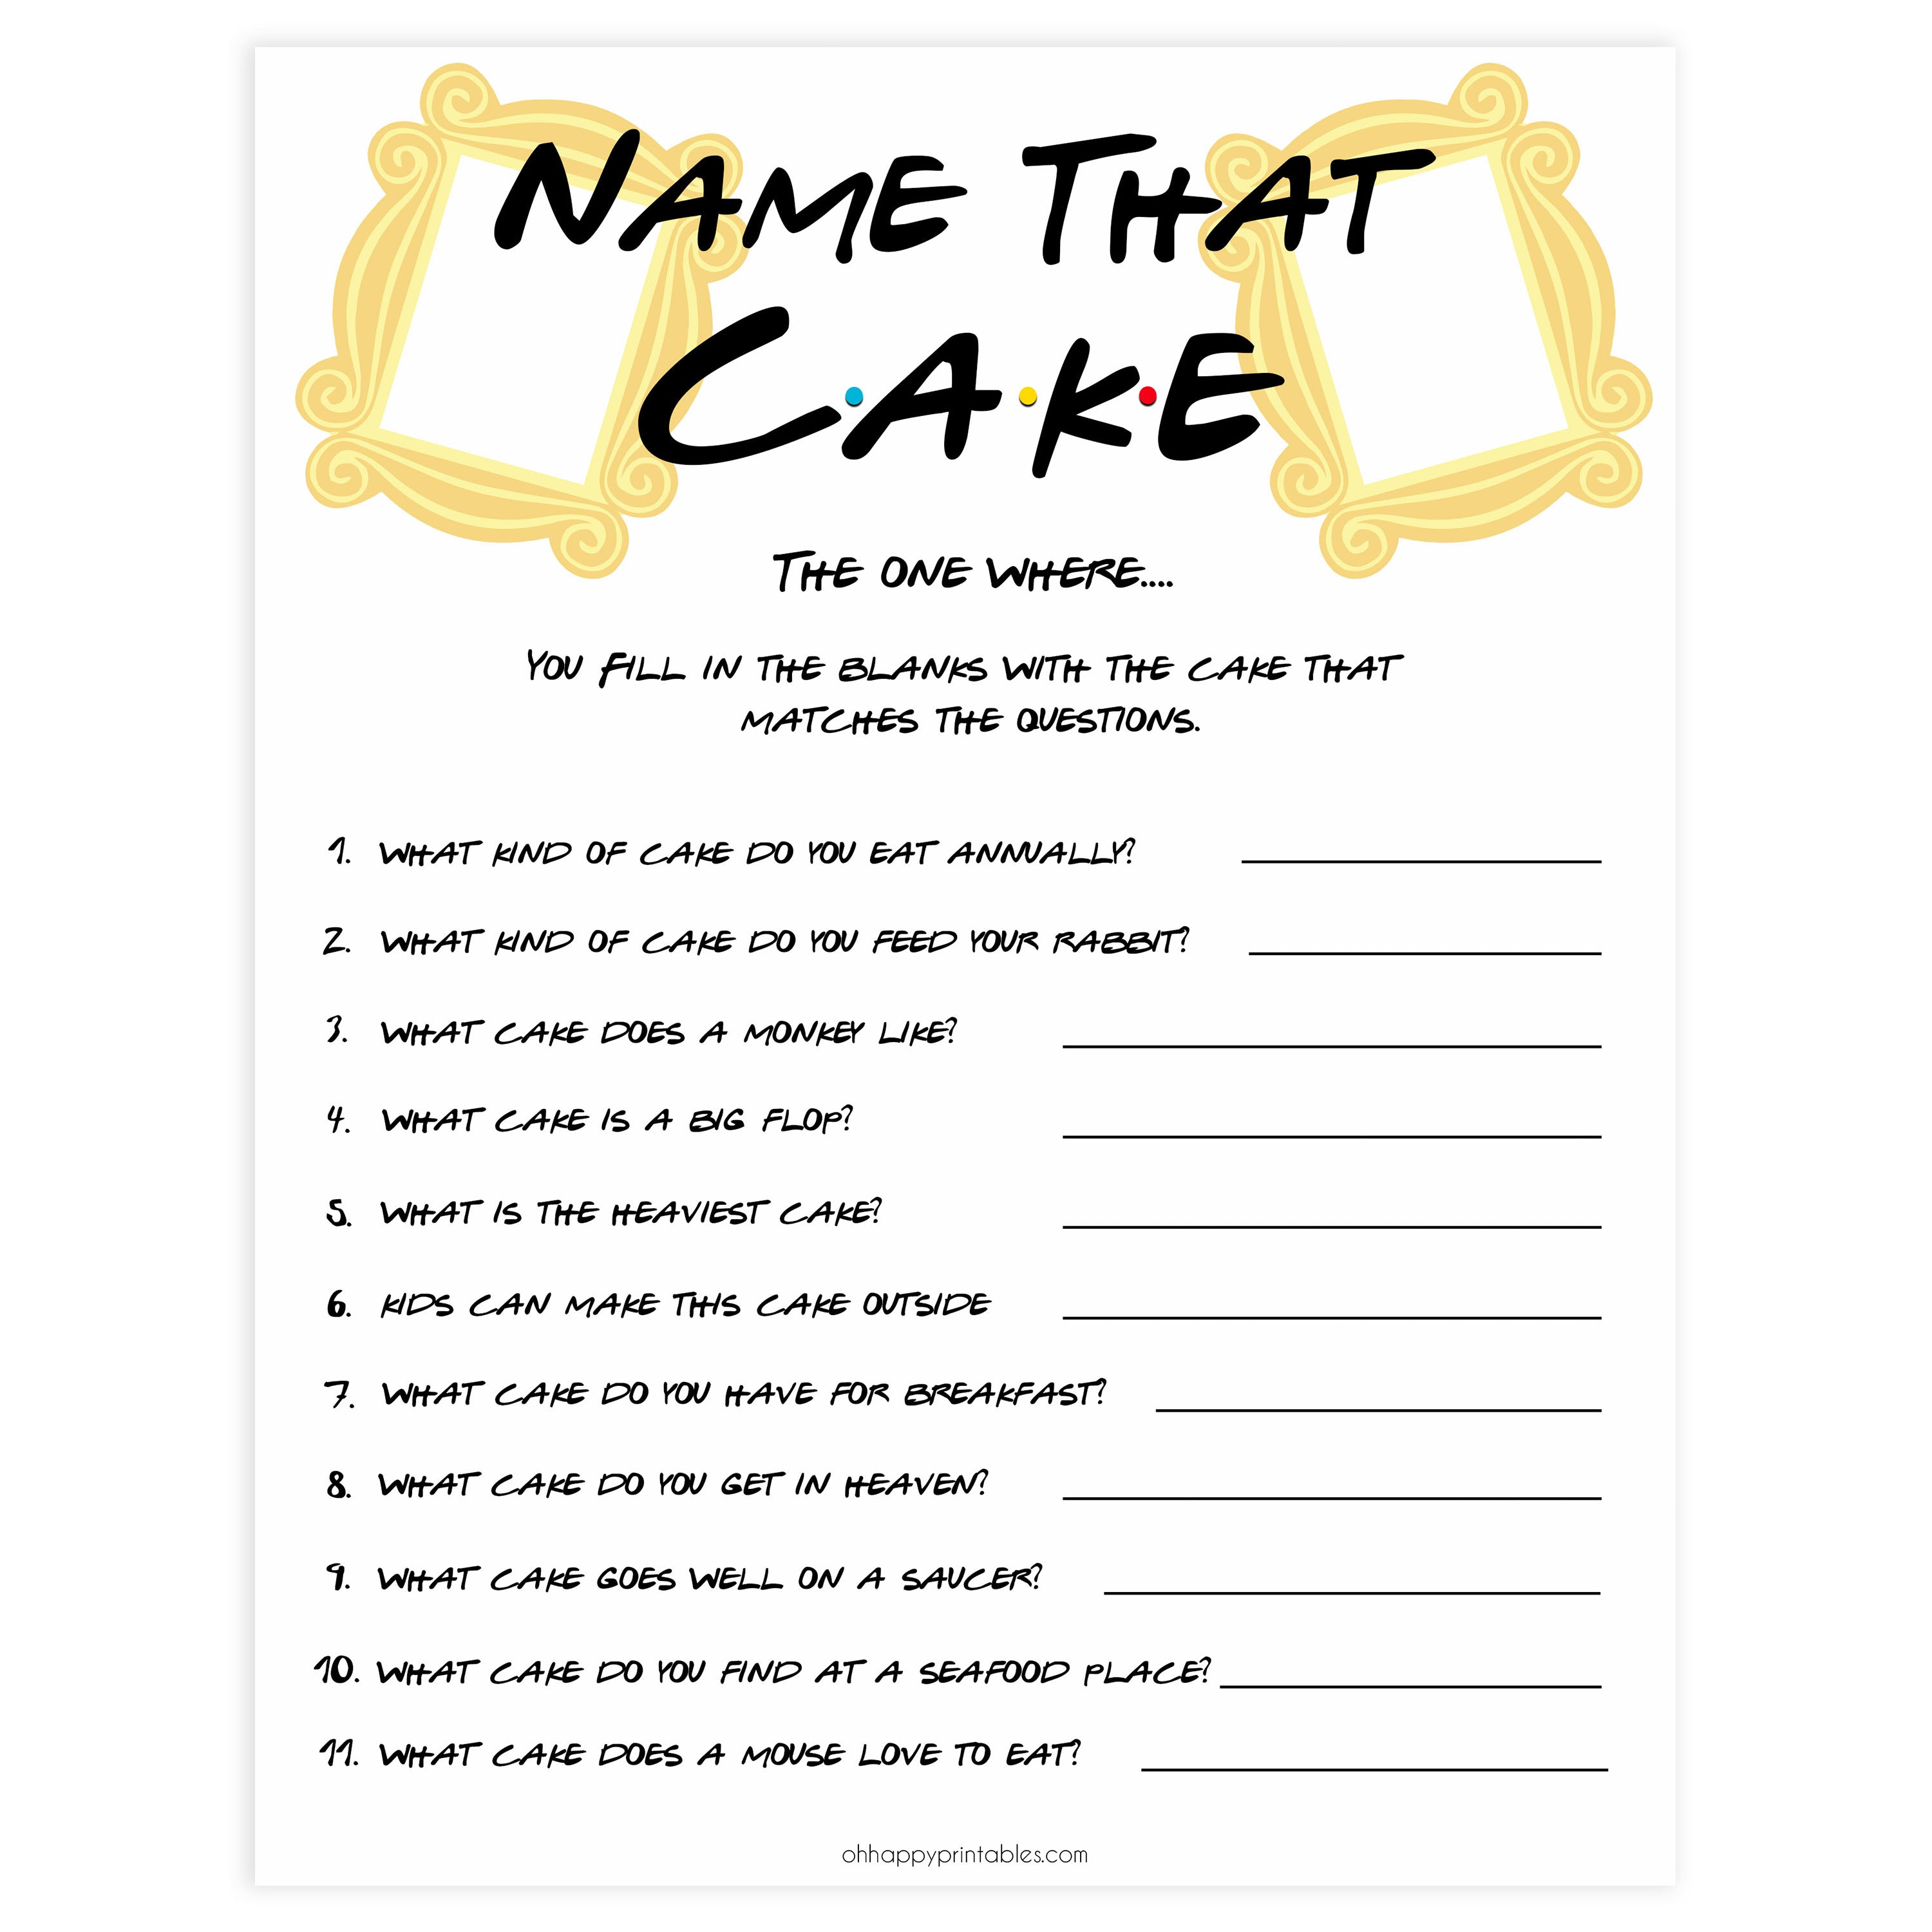 Name that Cake Game - Printable Friends Bridal Shower Games ...